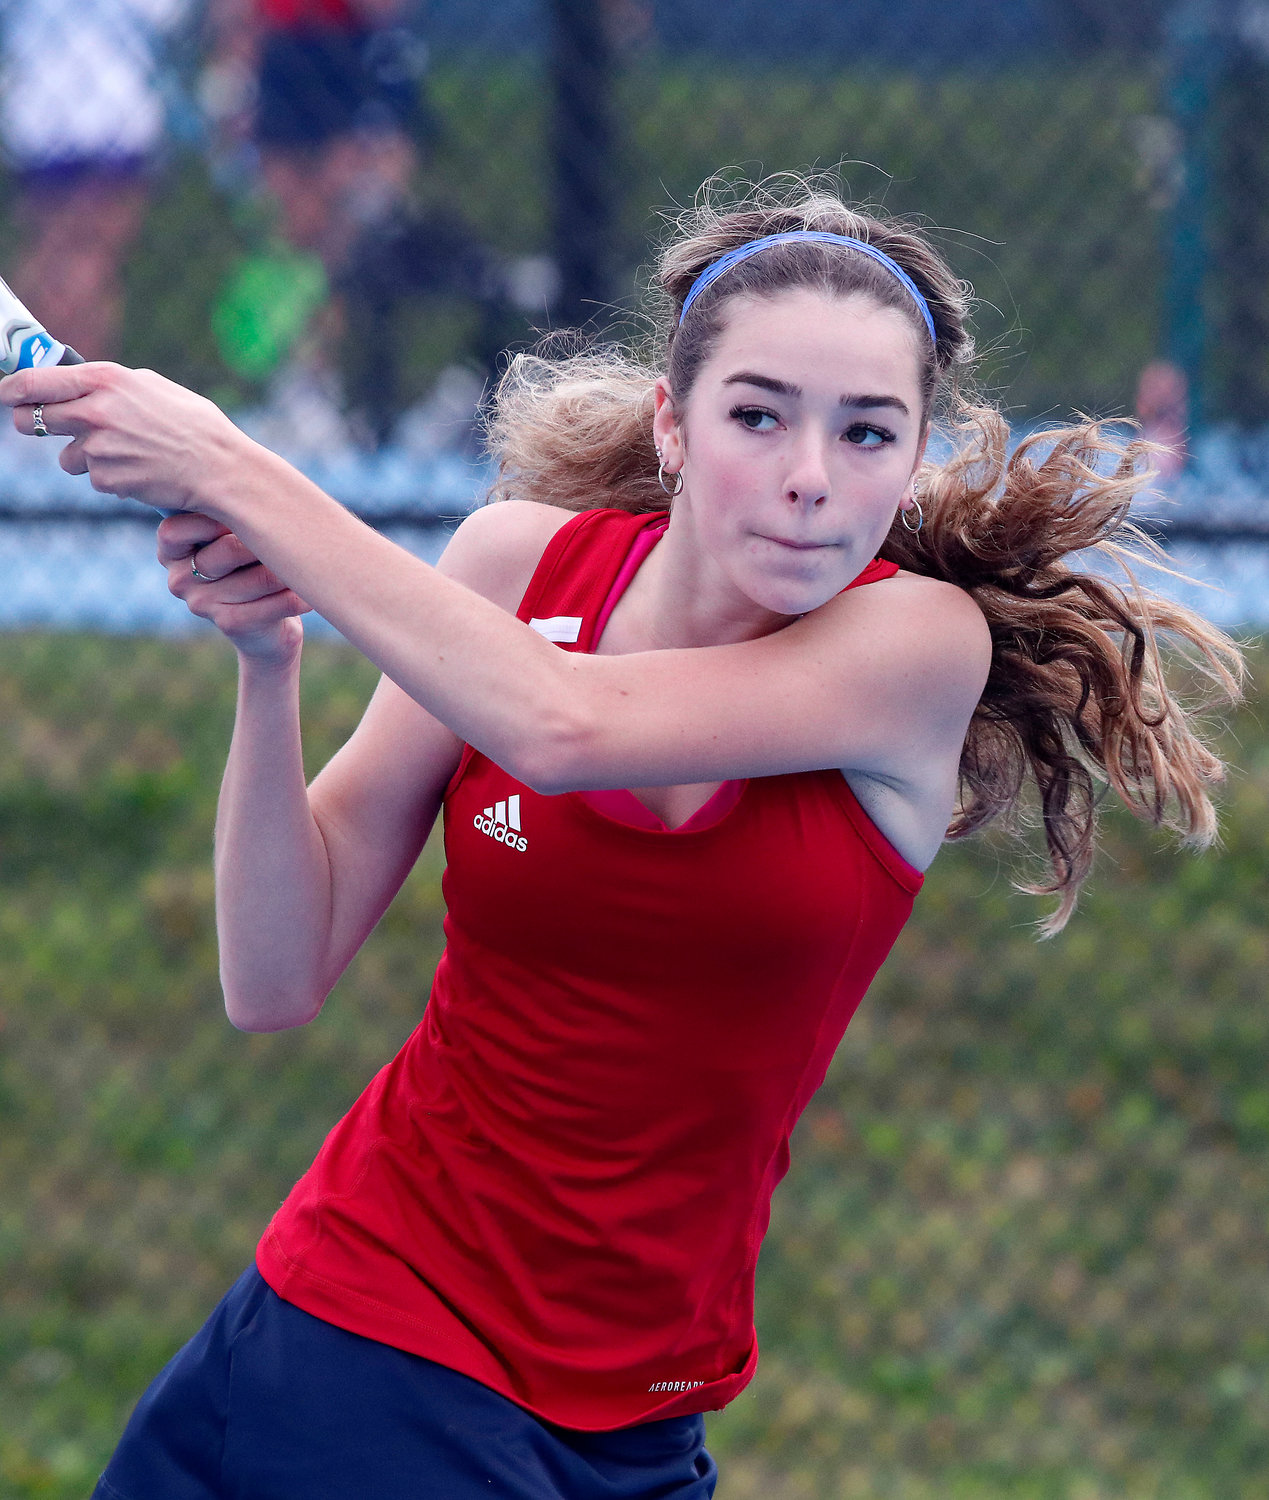 Portsmouth’s Kat Deus beat Cate Meriam of Mt. Hope in three sets, 6-1, 2-6, 7-6 (7-3), in the No. 3 singles match.